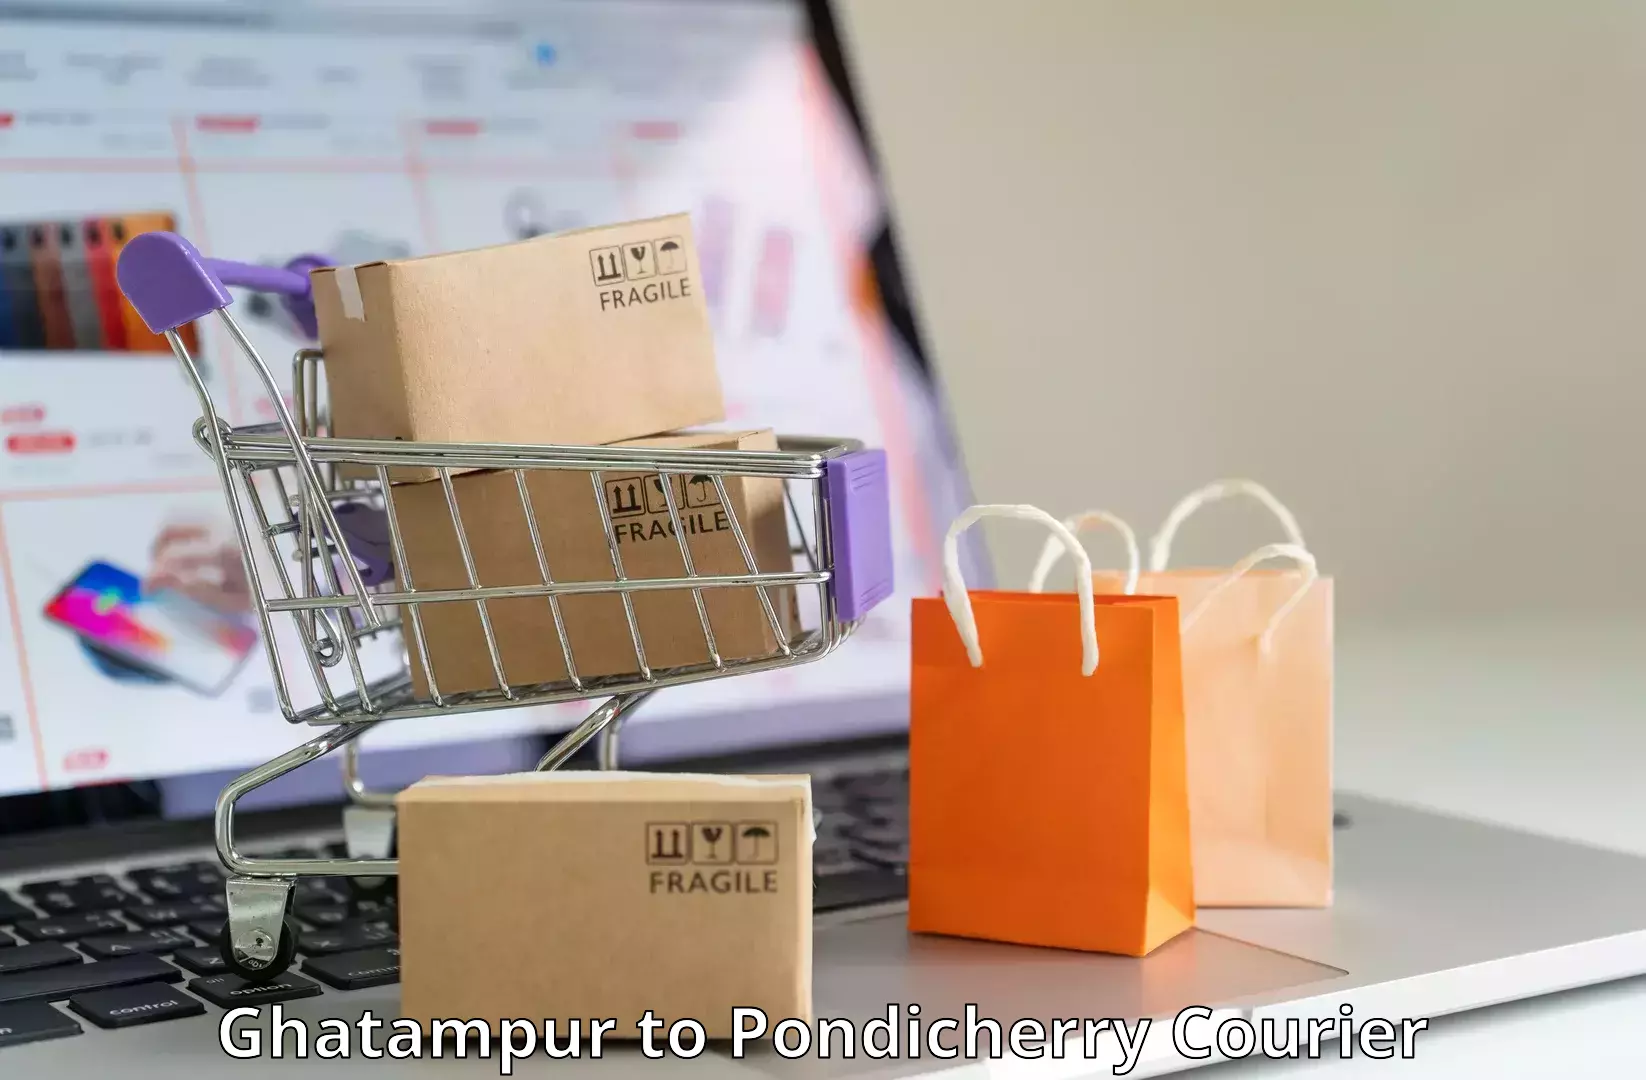 Professional courier services in Ghatampur to Pondicherry University